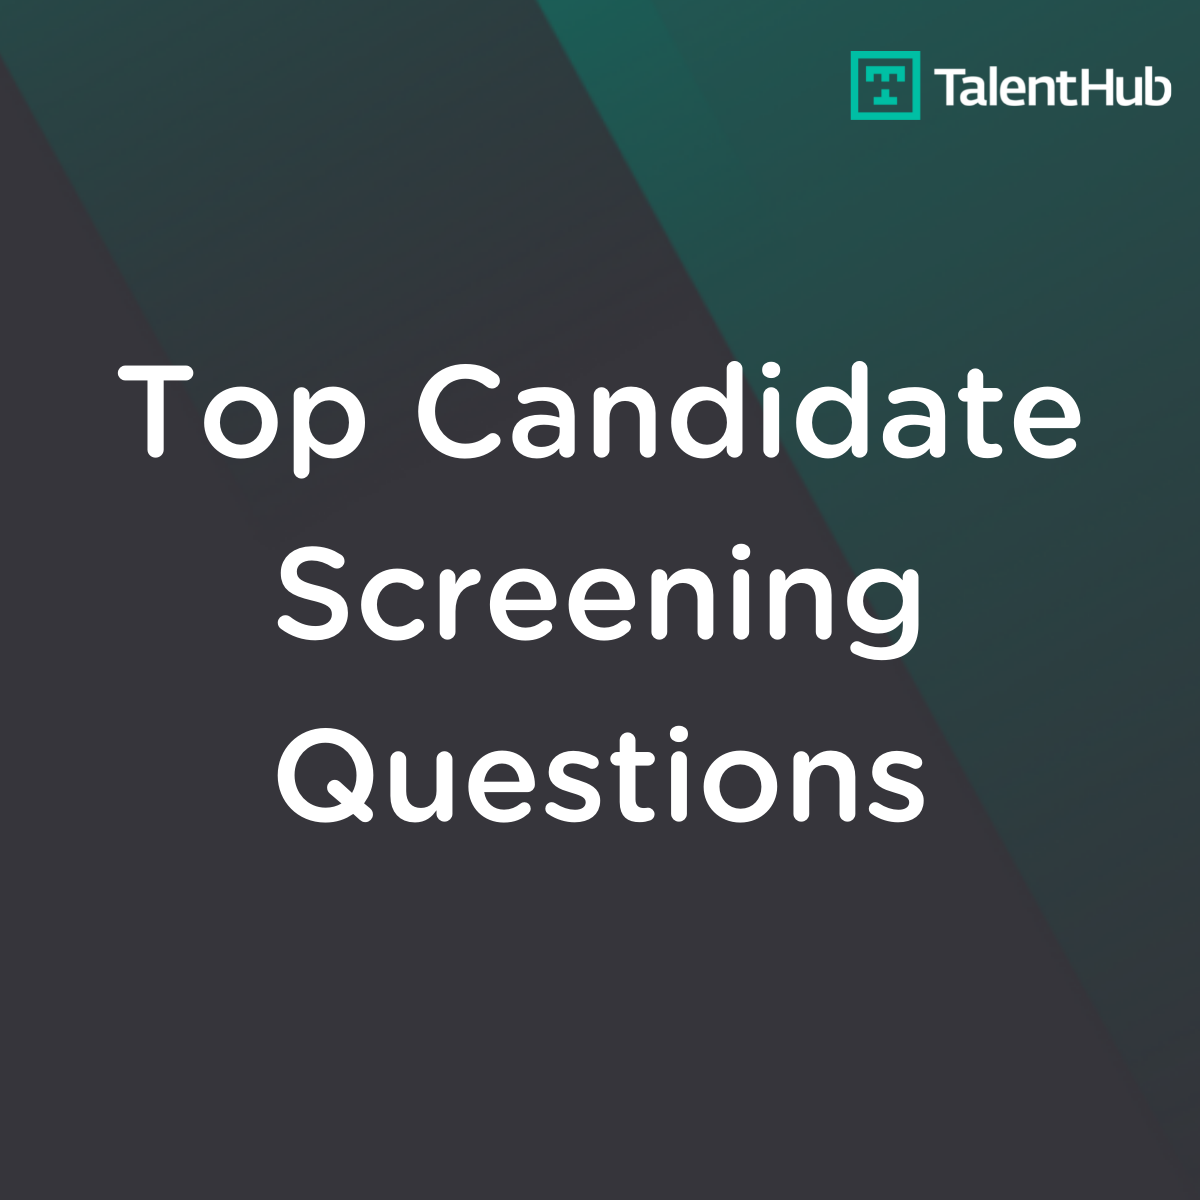 Top Candidate Screening Questions